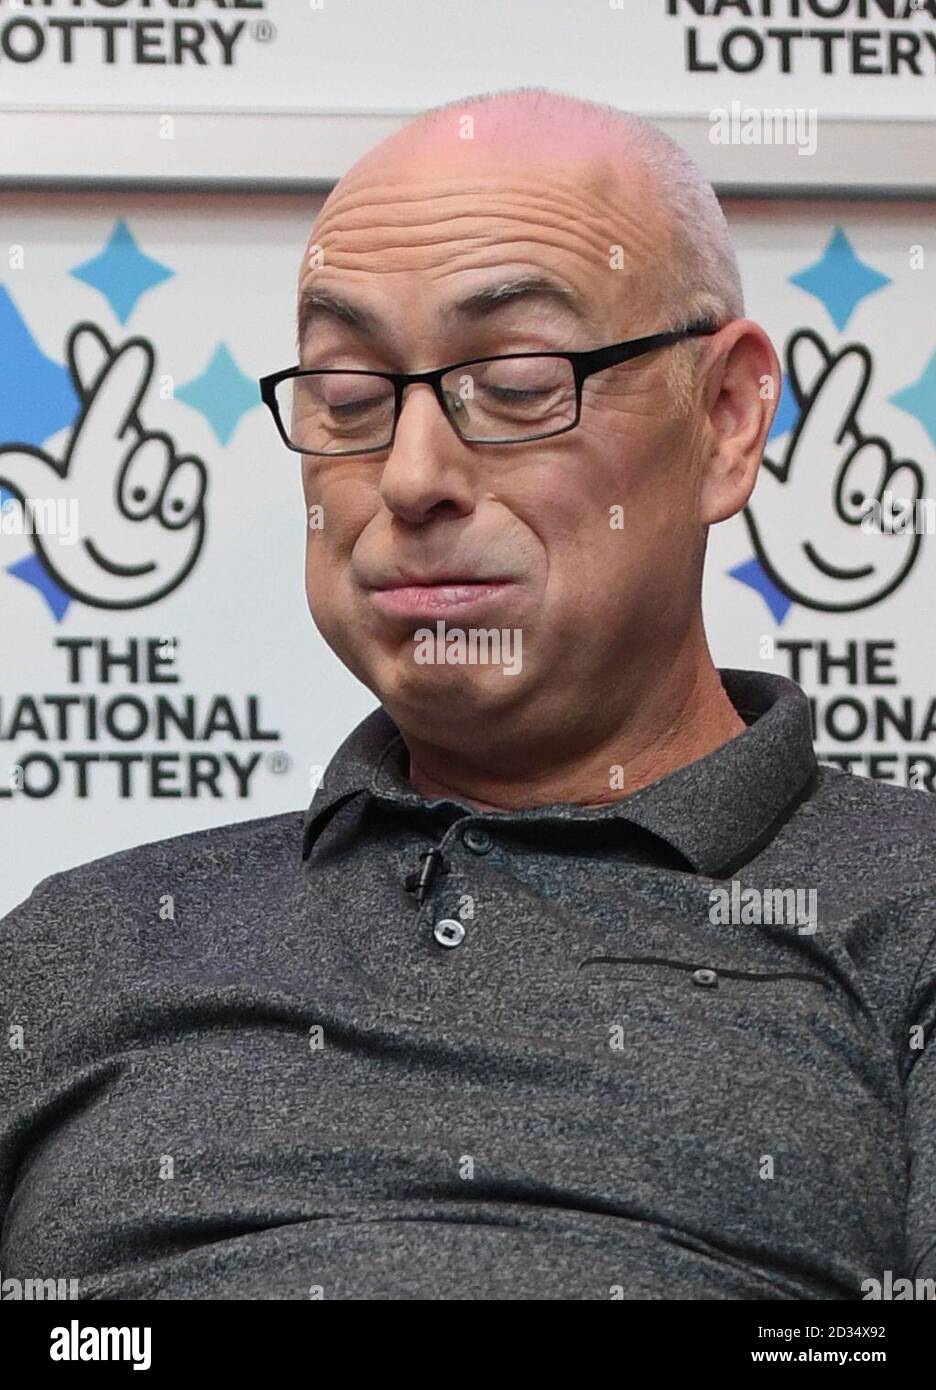 Andrew Clark, 51, from Boston, Lincolnshire, celebrates his £76,369,806.80 EuroMillions jackpot win from the draw on Friday 2 November 2018 at Belton Woods Hotel, Grantham. Stock Photo